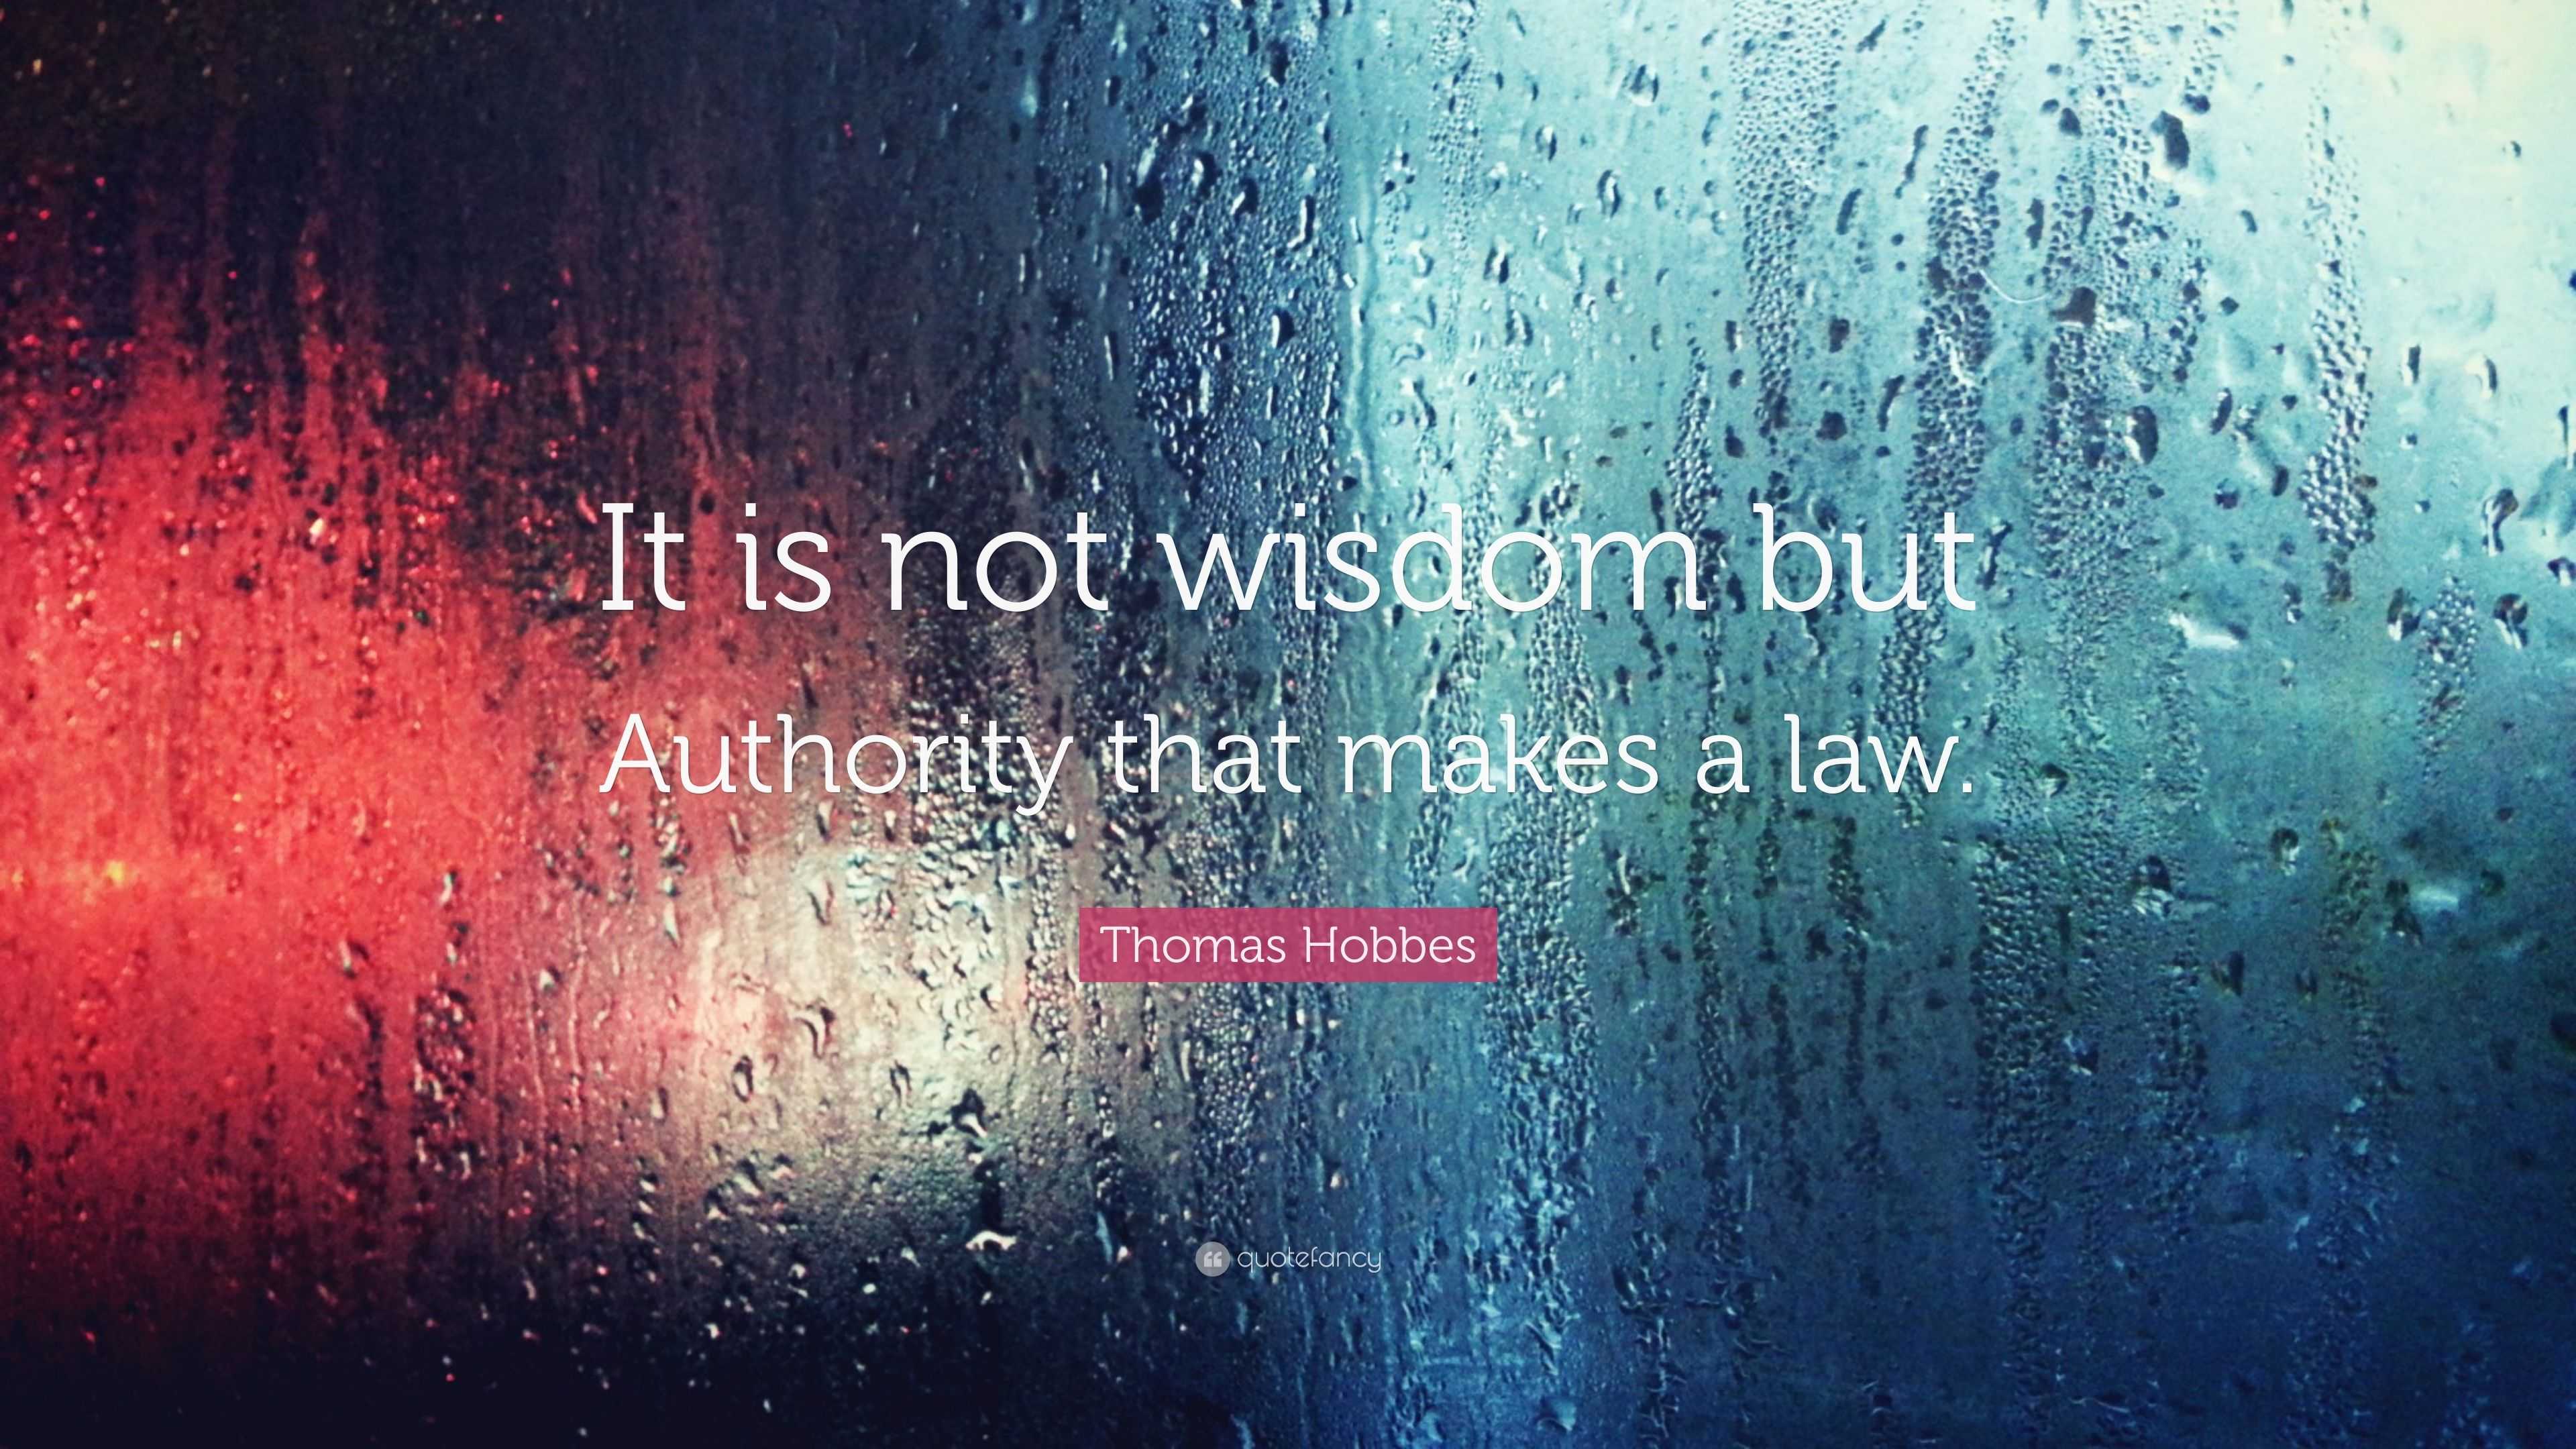 Thomas Hobbes Quote: “It is not wisdom but Authority that makes a law.”